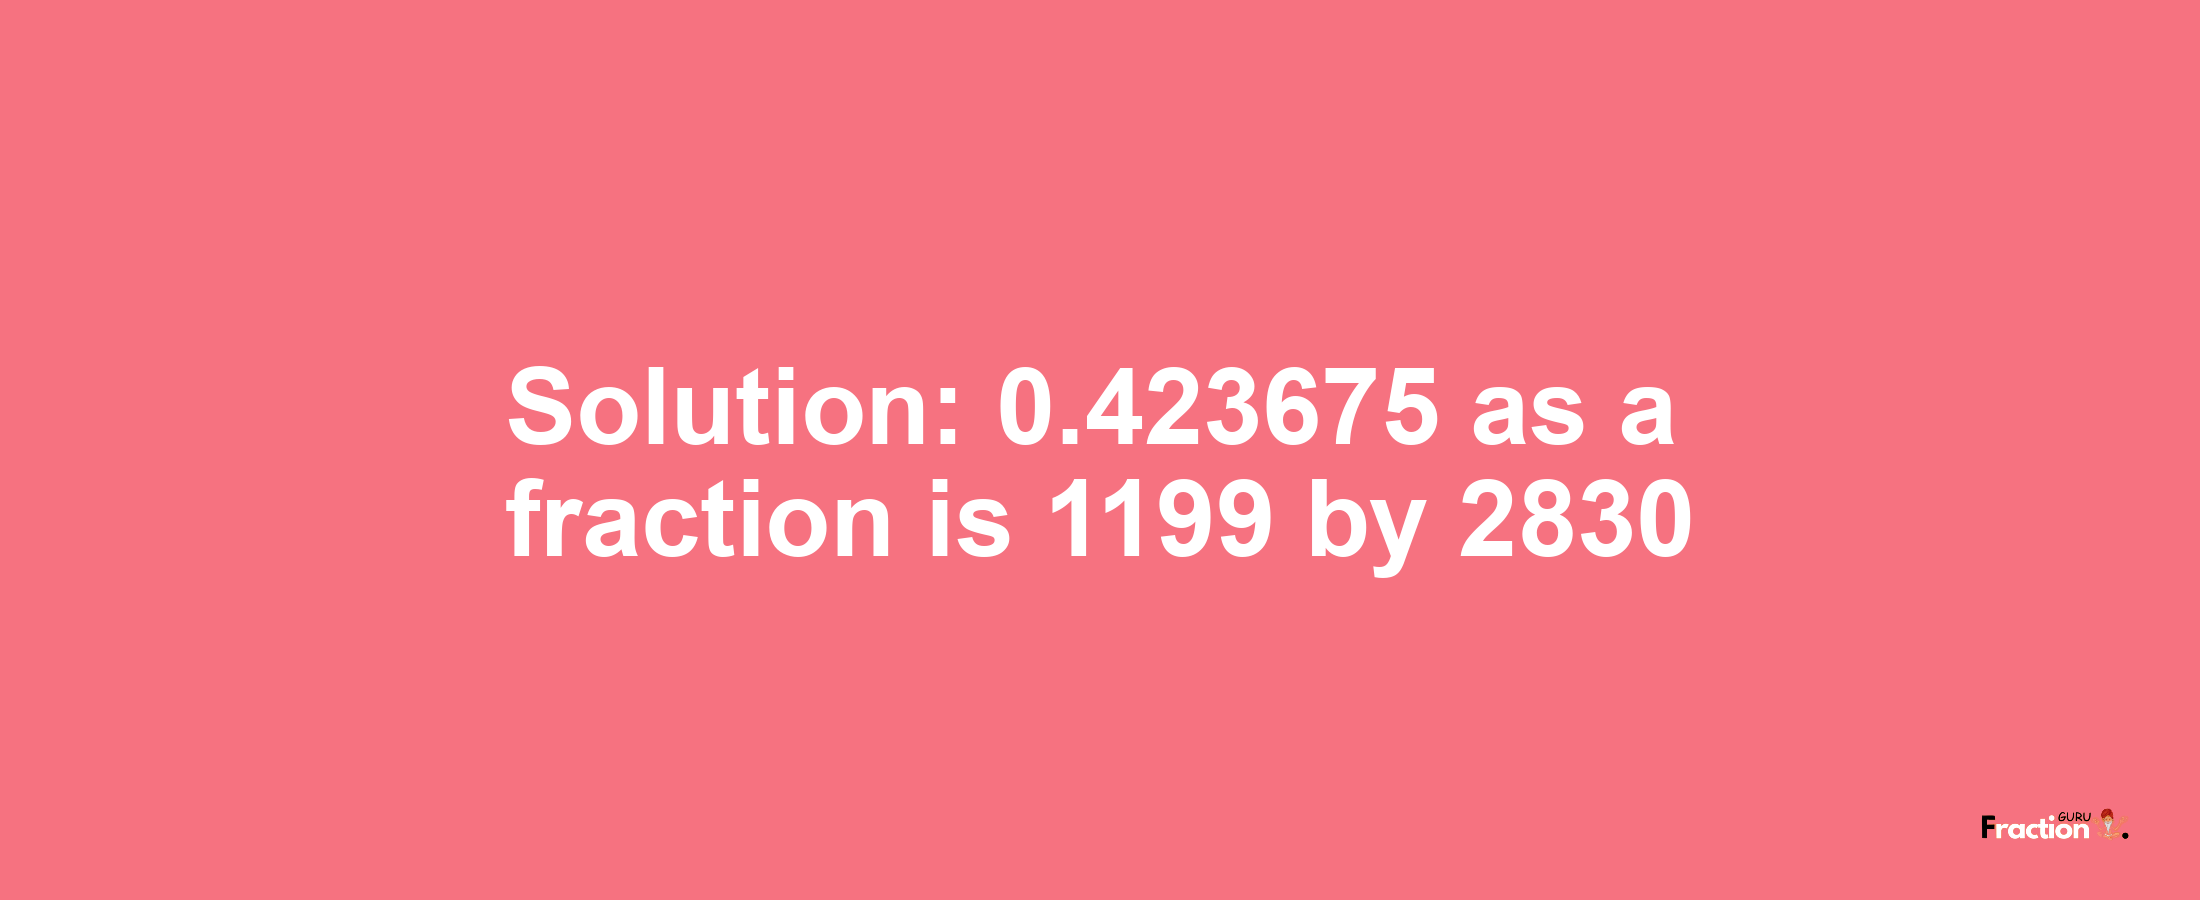 Solution:0.423675 as a fraction is 1199/2830